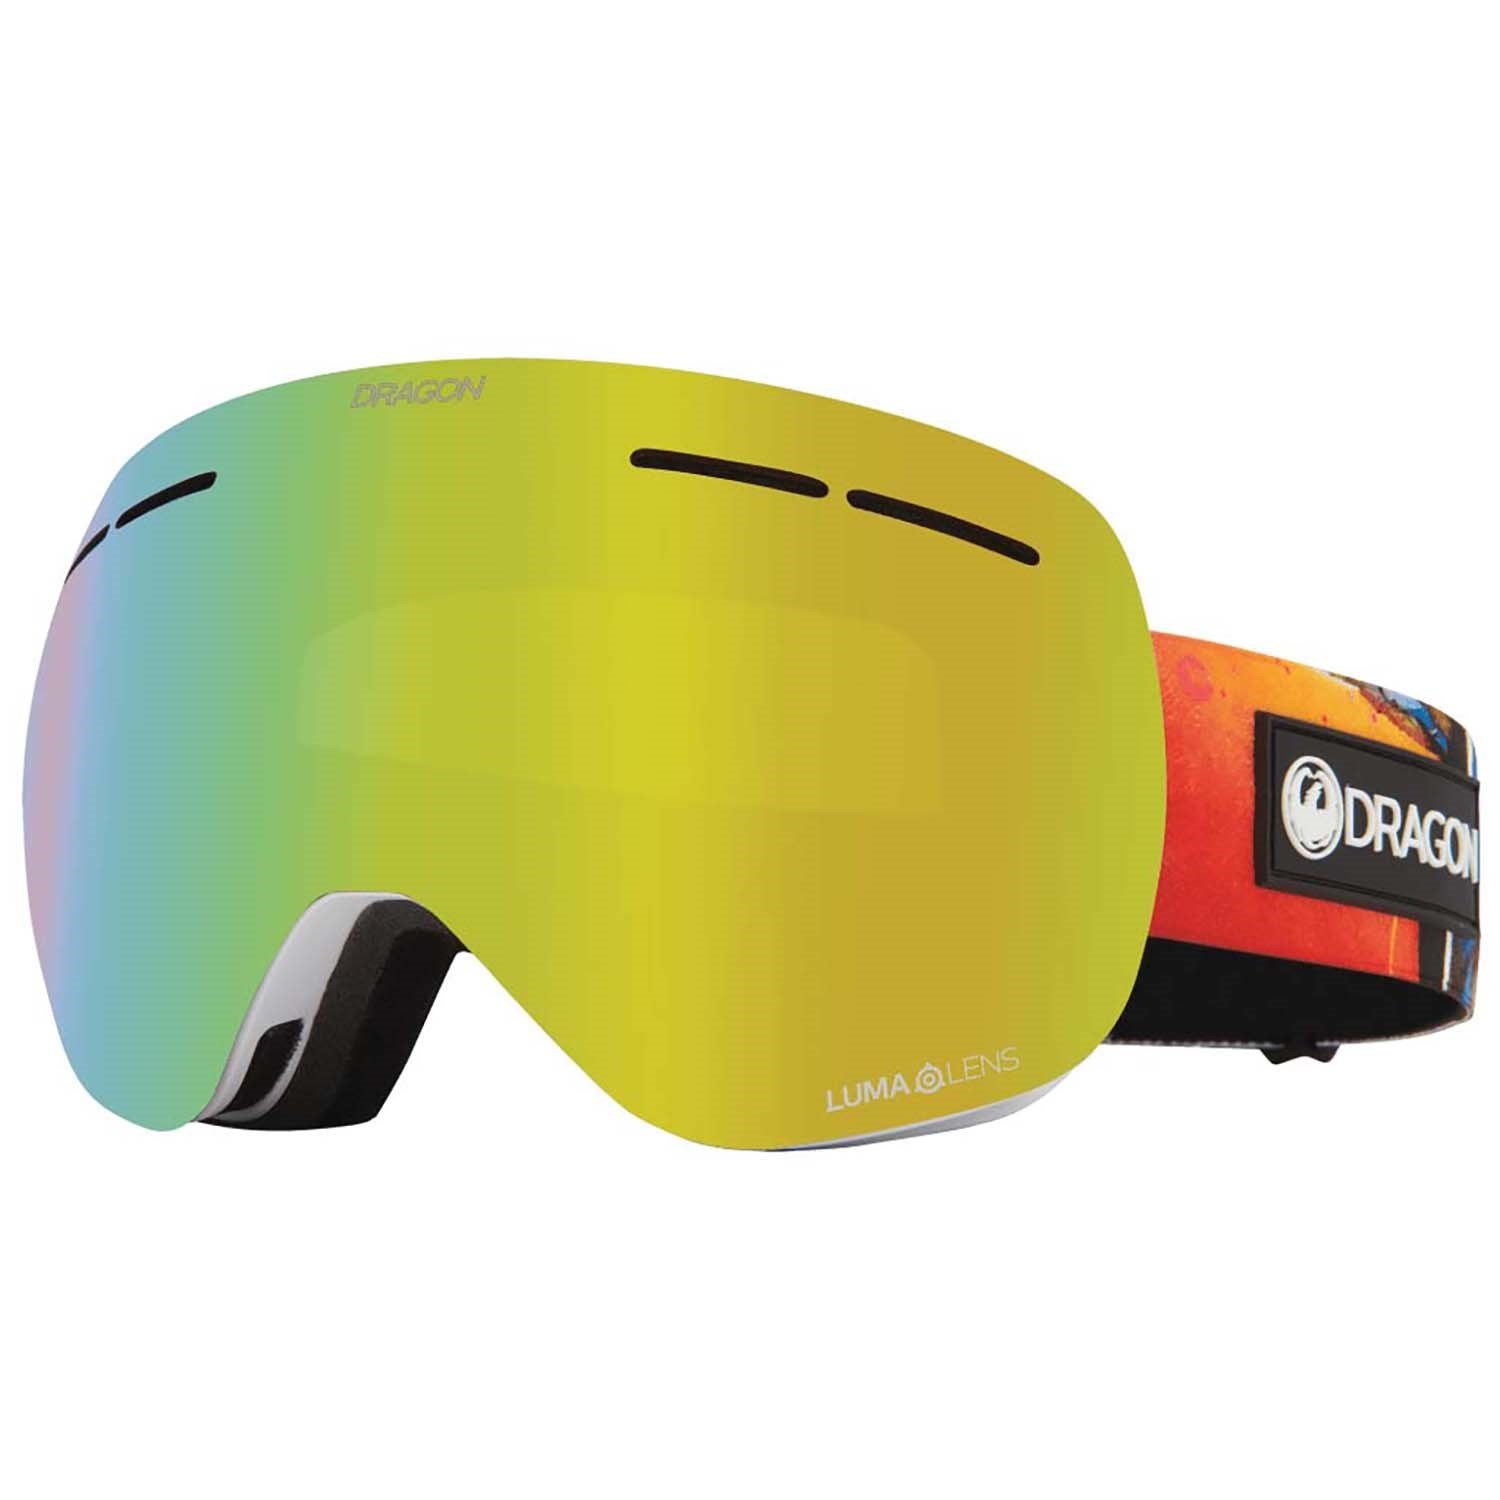 Dragon Alliance X1 Ski Goggles Stack blue steel Yellow/red Ionized  NEW 